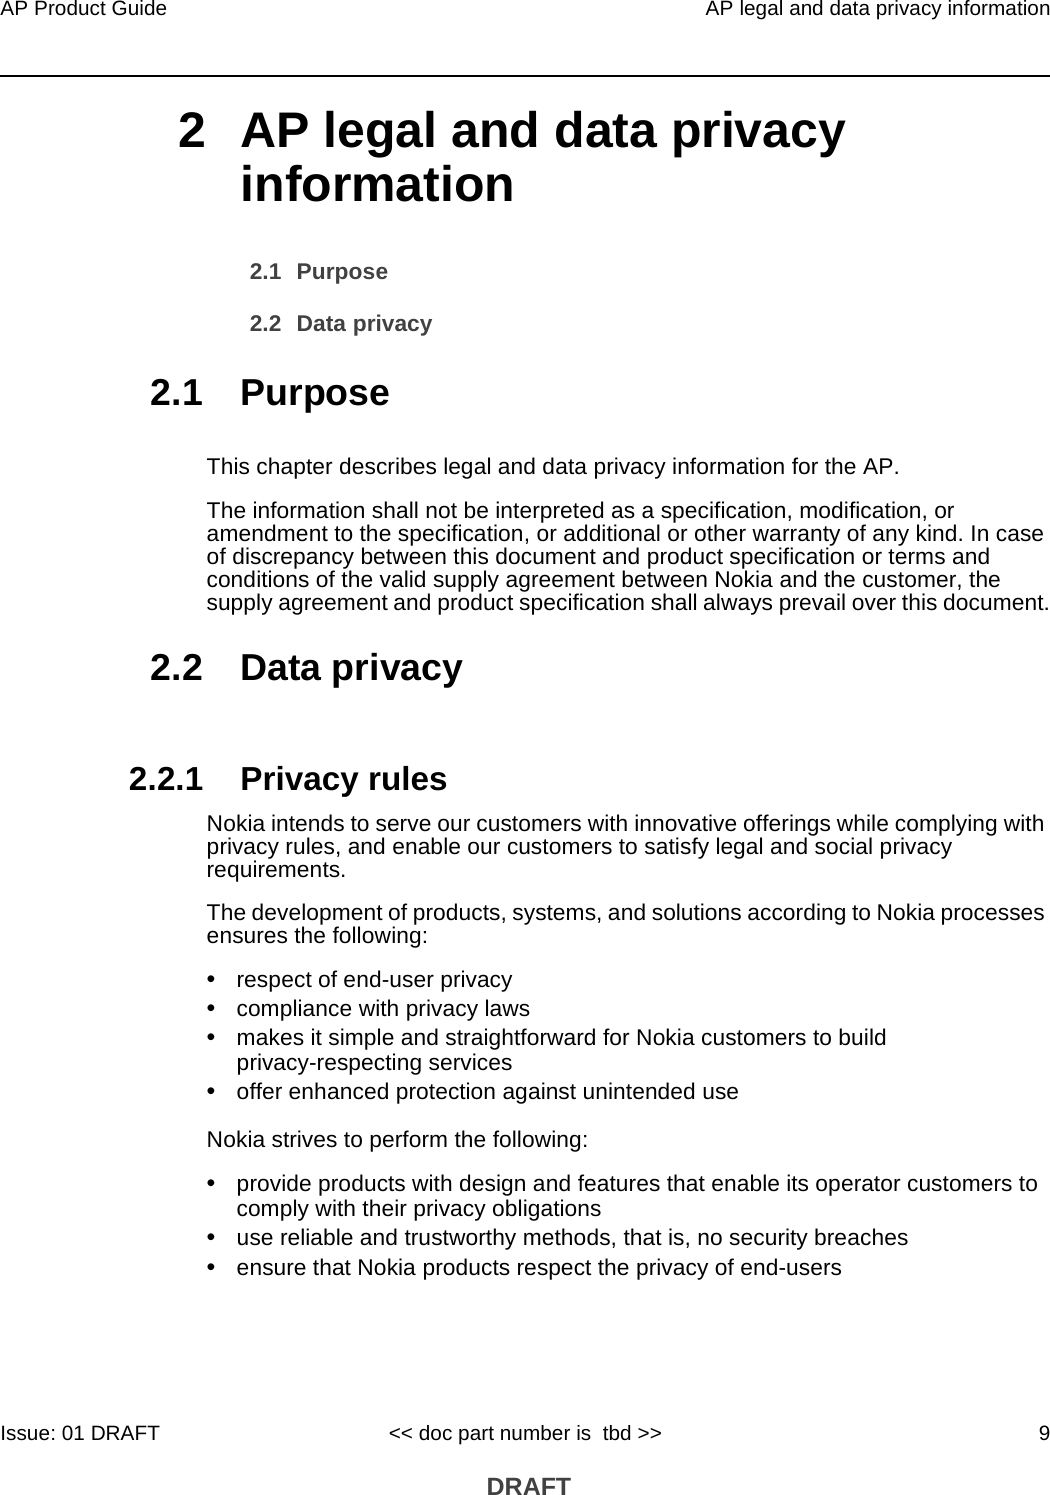 AP Product Guide AP legal and data privacy informationIssue: 01 DRAFT &lt;&lt; doc part number is  tbd &gt;&gt; 9 DRAFT2 AP legal and data privacy information2.1 Purpose2.2 Data privacy2.1 PurposeThis chapter describes legal and data privacy information for the AP.The information shall not be interpreted as a specification, modification, or amendment to the specification, or additional or other warranty of any kind. In case of discrepancy between this document and product specification or terms and conditions of the valid supply agreement between Nokia and the customer, the supply agreement and product specification shall always prevail over this document.2.2 Data privacy2.2.1 Privacy rulesNokia intends to serve our customers with innovative offerings while complying with privacy rules, and enable our customers to satisfy legal and social privacy requirements.The development of products, systems, and solutions according to Nokia processes ensures the following:•respect of end-user privacy•compliance with privacy laws•makes it simple and straightforward for Nokia customers to build privacy-respecting services•offer enhanced protection against unintended useNokia strives to perform the following:•provide products with design and features that enable its operator customers to comply with their privacy obligations•use reliable and trustworthy methods, that is, no security breaches•ensure that Nokia products respect the privacy of end-users